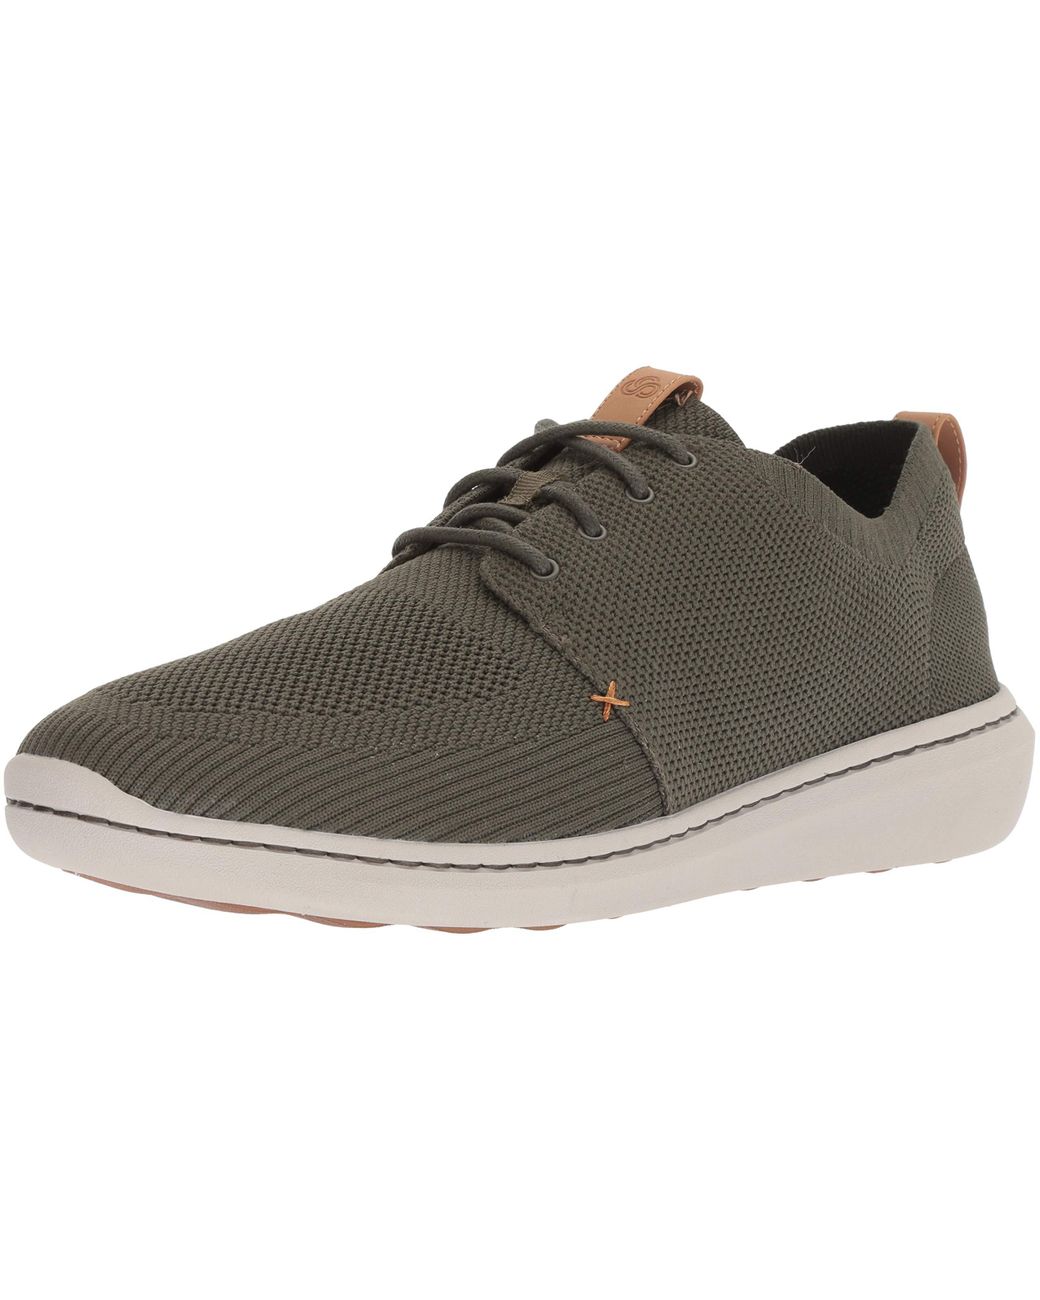 Clarks Step Urban Mix Mens Casual Trainers | Lyst